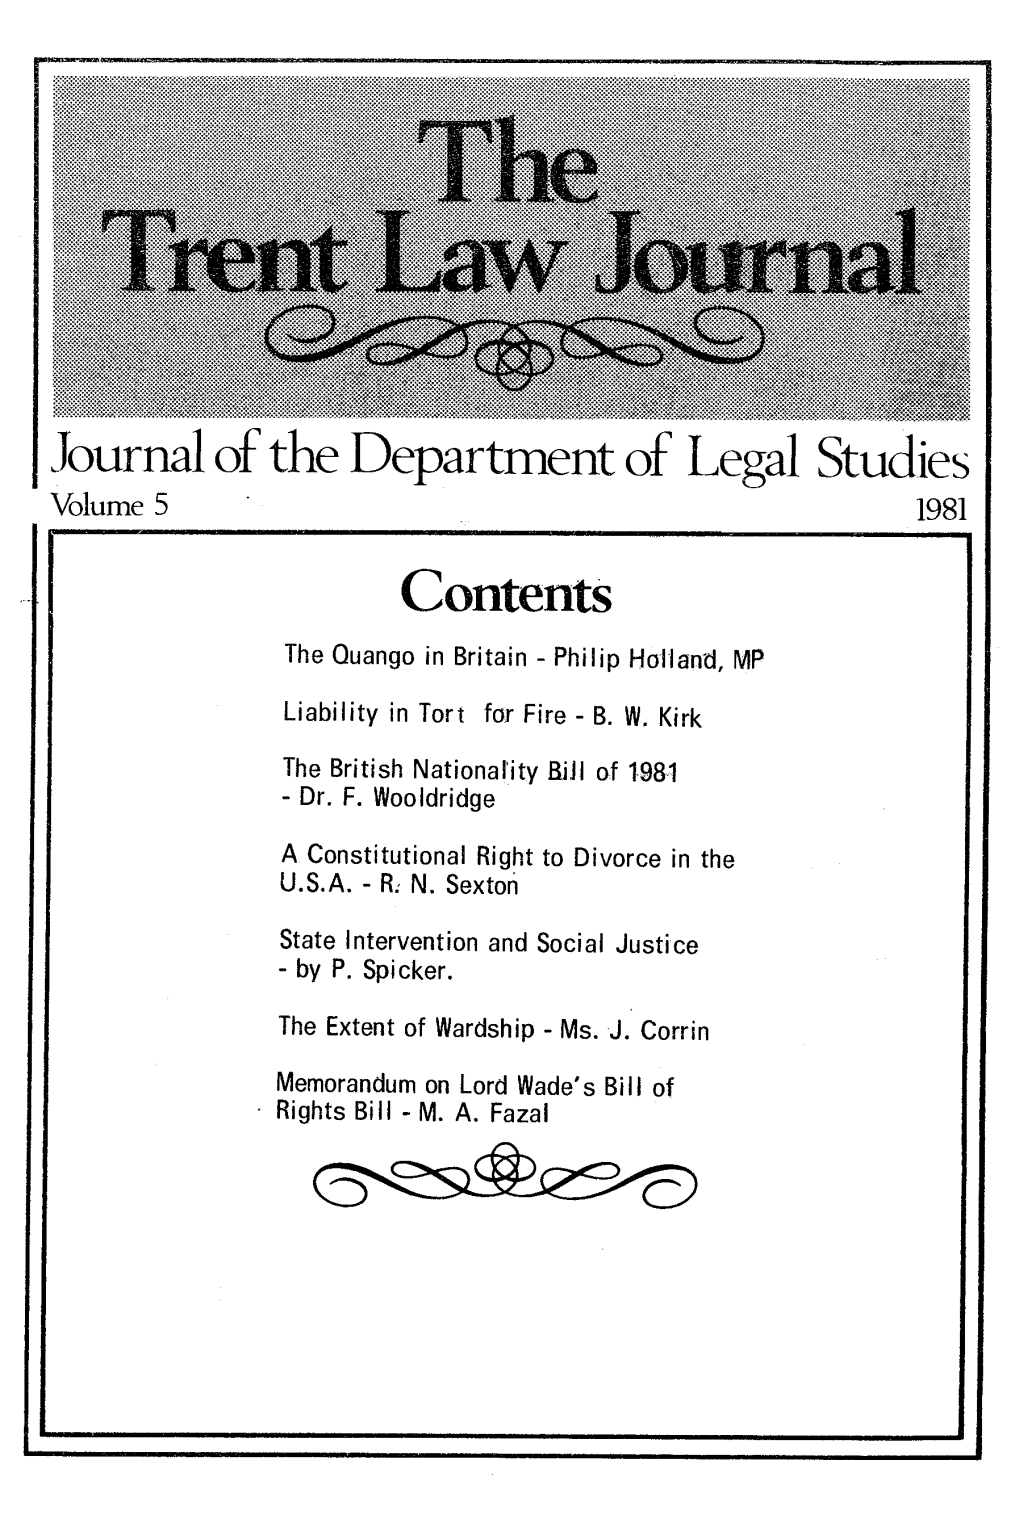 Journal of the Department of Legal Studies Volume 5 1981 Contents the Ouango in Britain - Philip Holland, MP